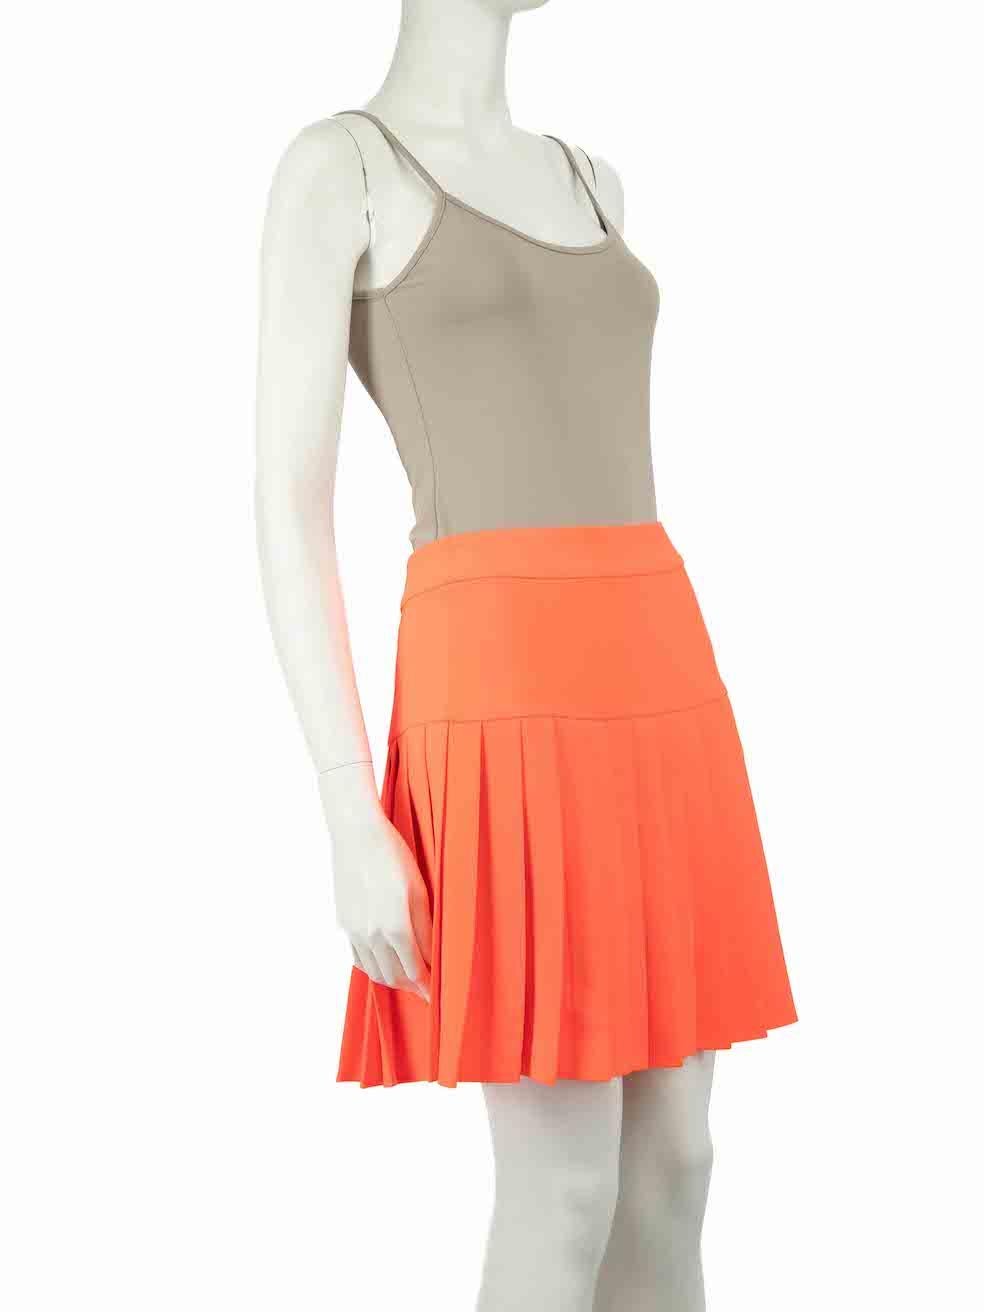 CONDITION is Very good. Hardly any visible wear to skirt is evident on this used McQ by Alexander McQueen designer resale item.
 
 
 
 Details
 
 
 Neon orange
 
 Polyester
 
 Skirt
 
 Pleated
 
 Mini
 
 Side zip and hook fastening
 
 
 
 
 
 Made